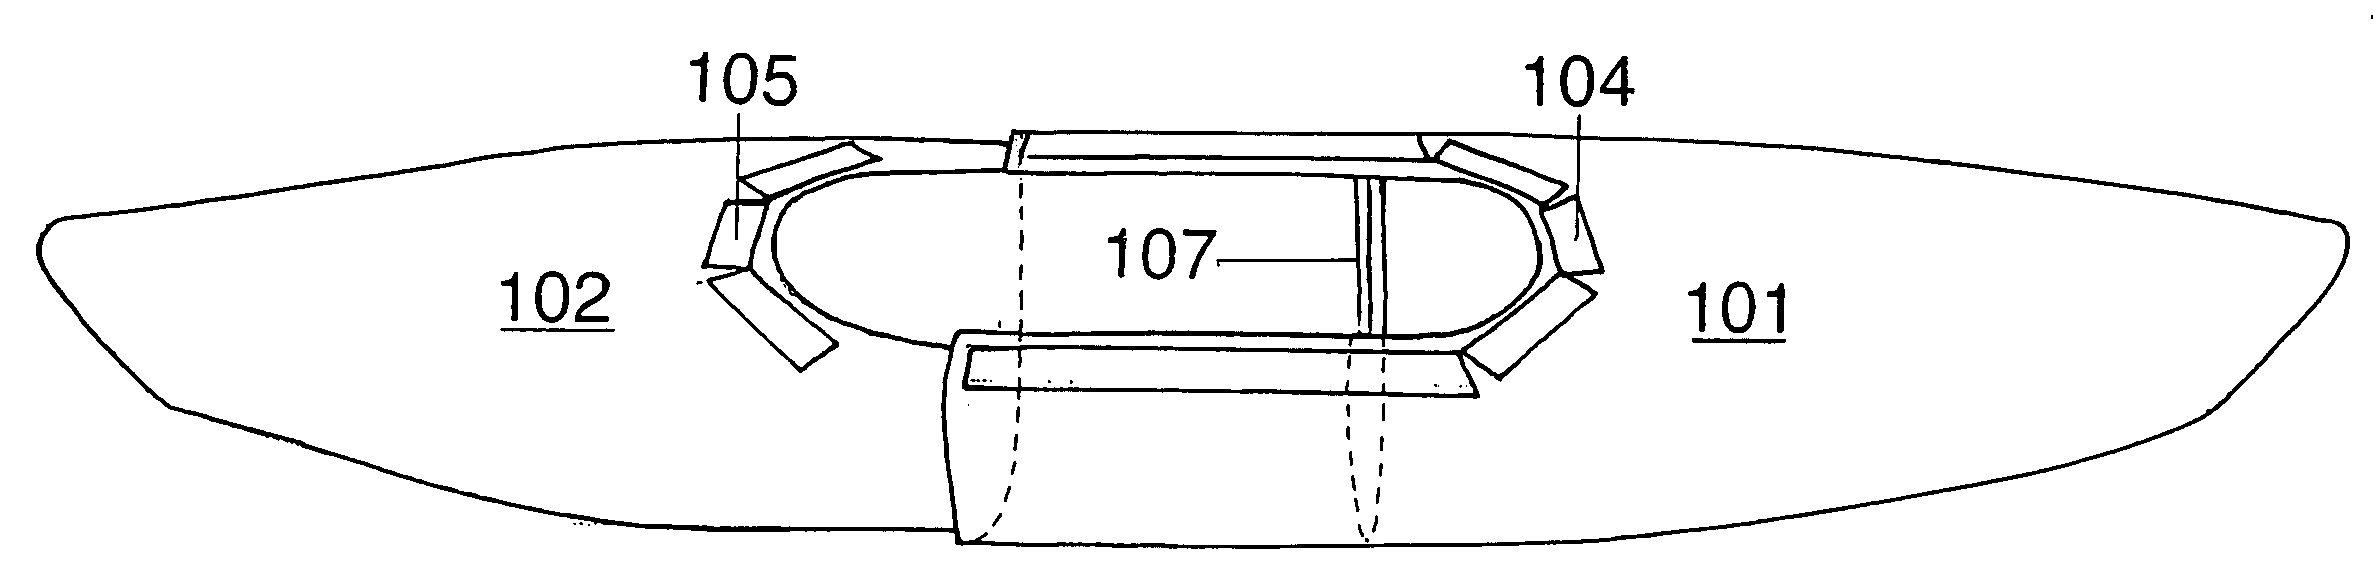 Portable boat in nesting sections, with waterproof fabric cover incorporating a stabilizing keel